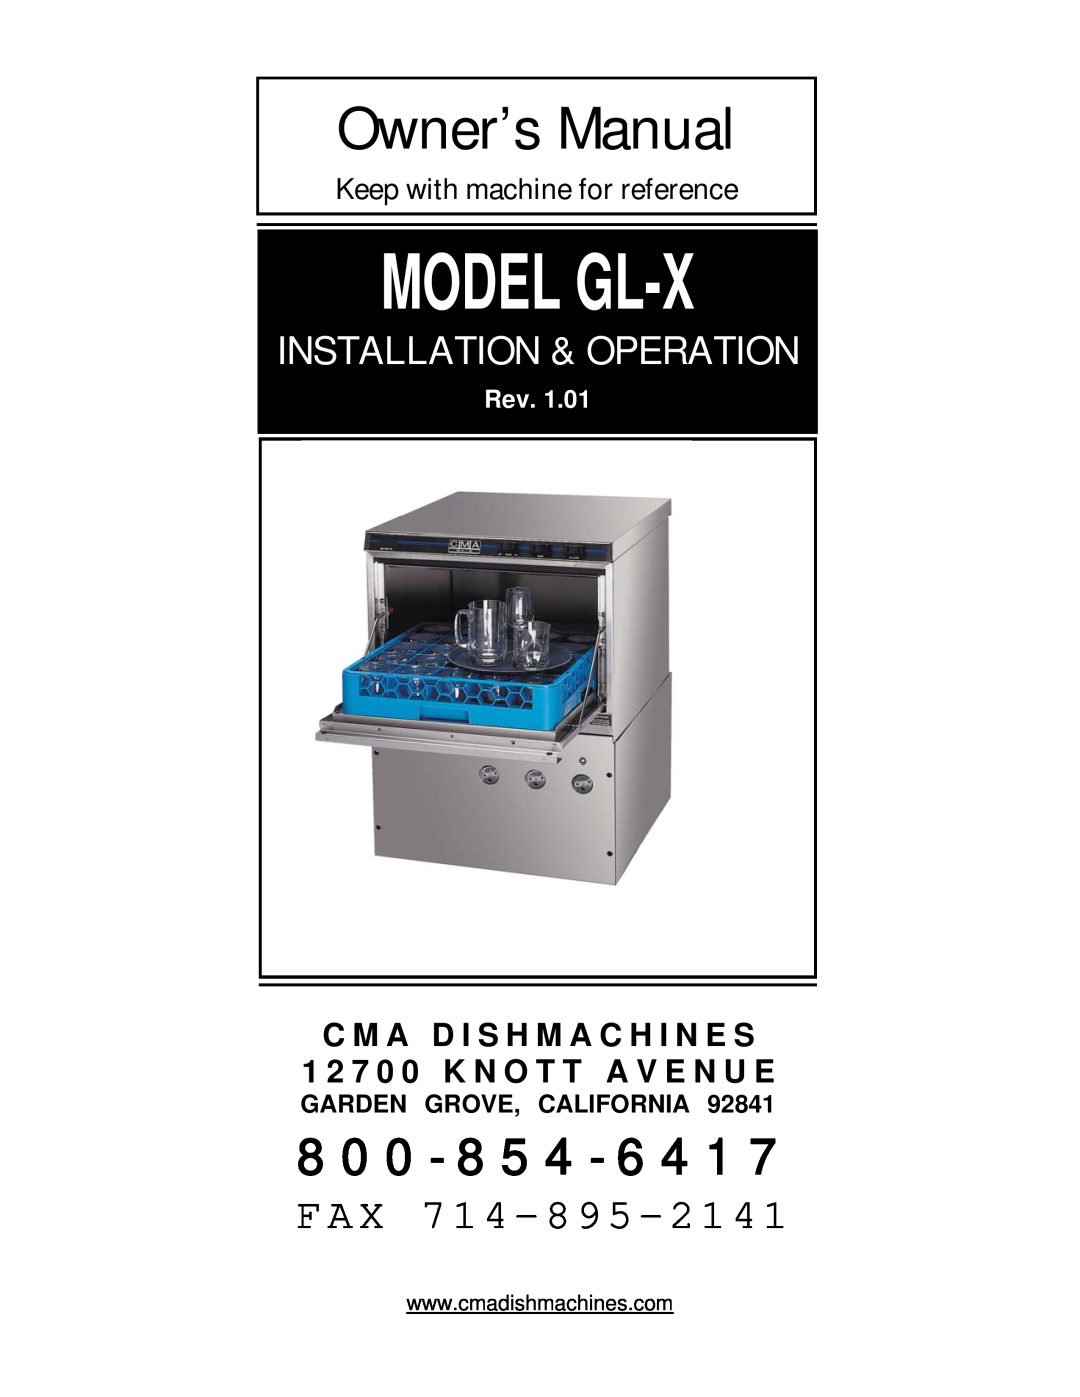 CMA Dishmachines GL-X owner manual Keep with machine for reference, C M A D I S H M A C H I N E S, Model Gl-X, Fax, Rev 